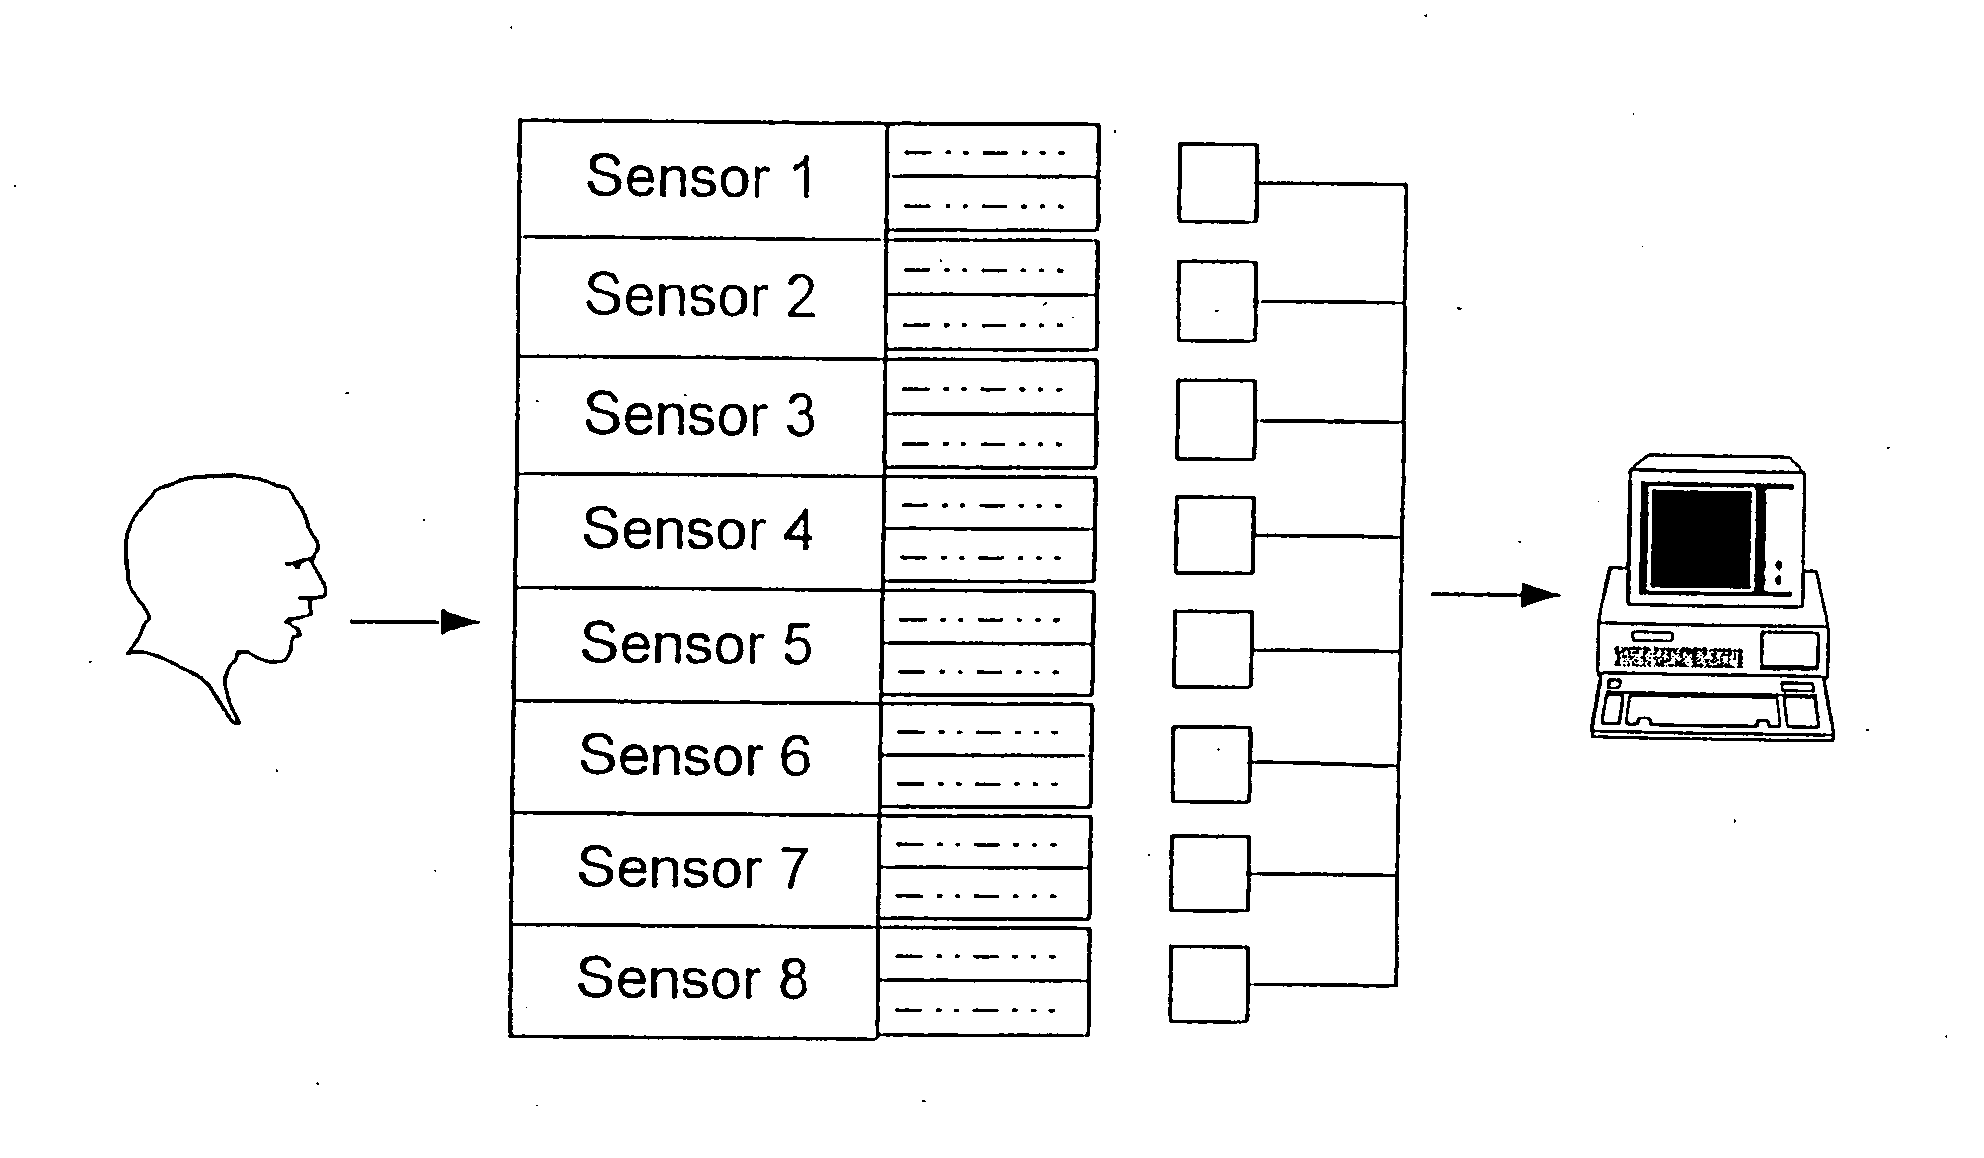 System and method for monitoring health using exhaled breath